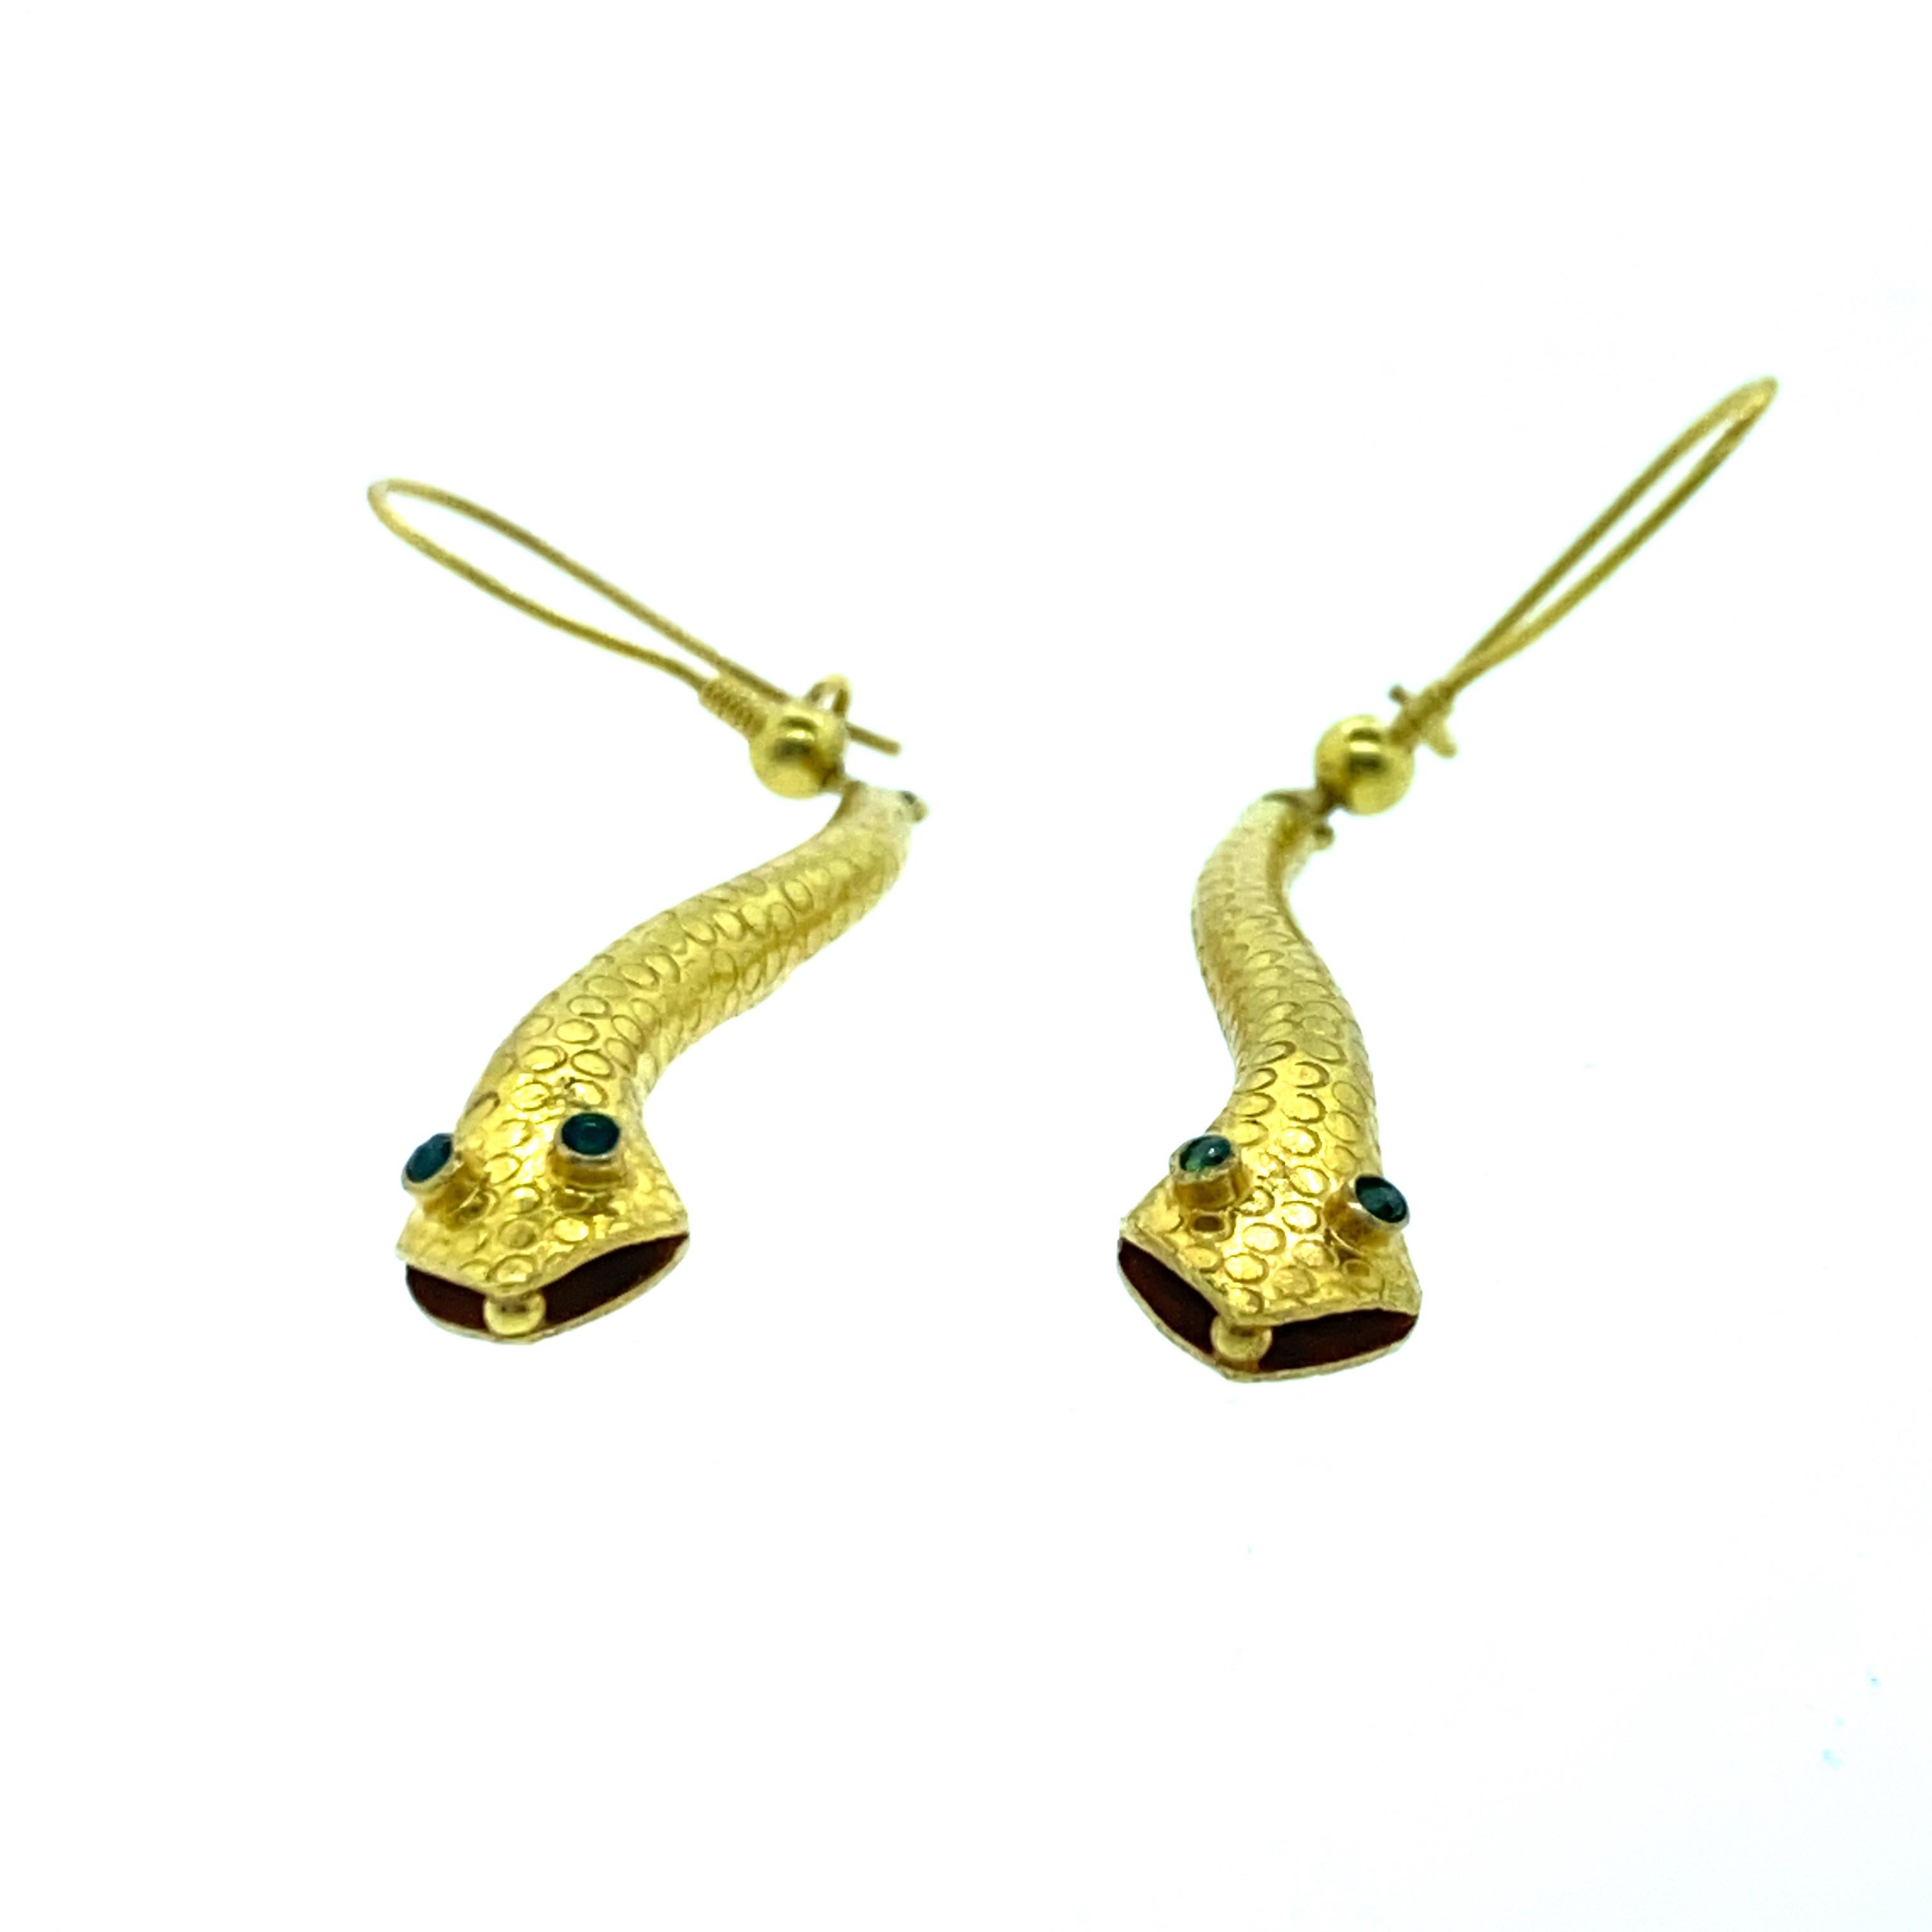 18K Yellow Gold Snake Earring with Emerald Eyes.The snake earring is finely crafted and handmade in India. The snake earring has intricate details to it. The mouth of the snake and the body of the snake have been beautifully made. The ear wire also